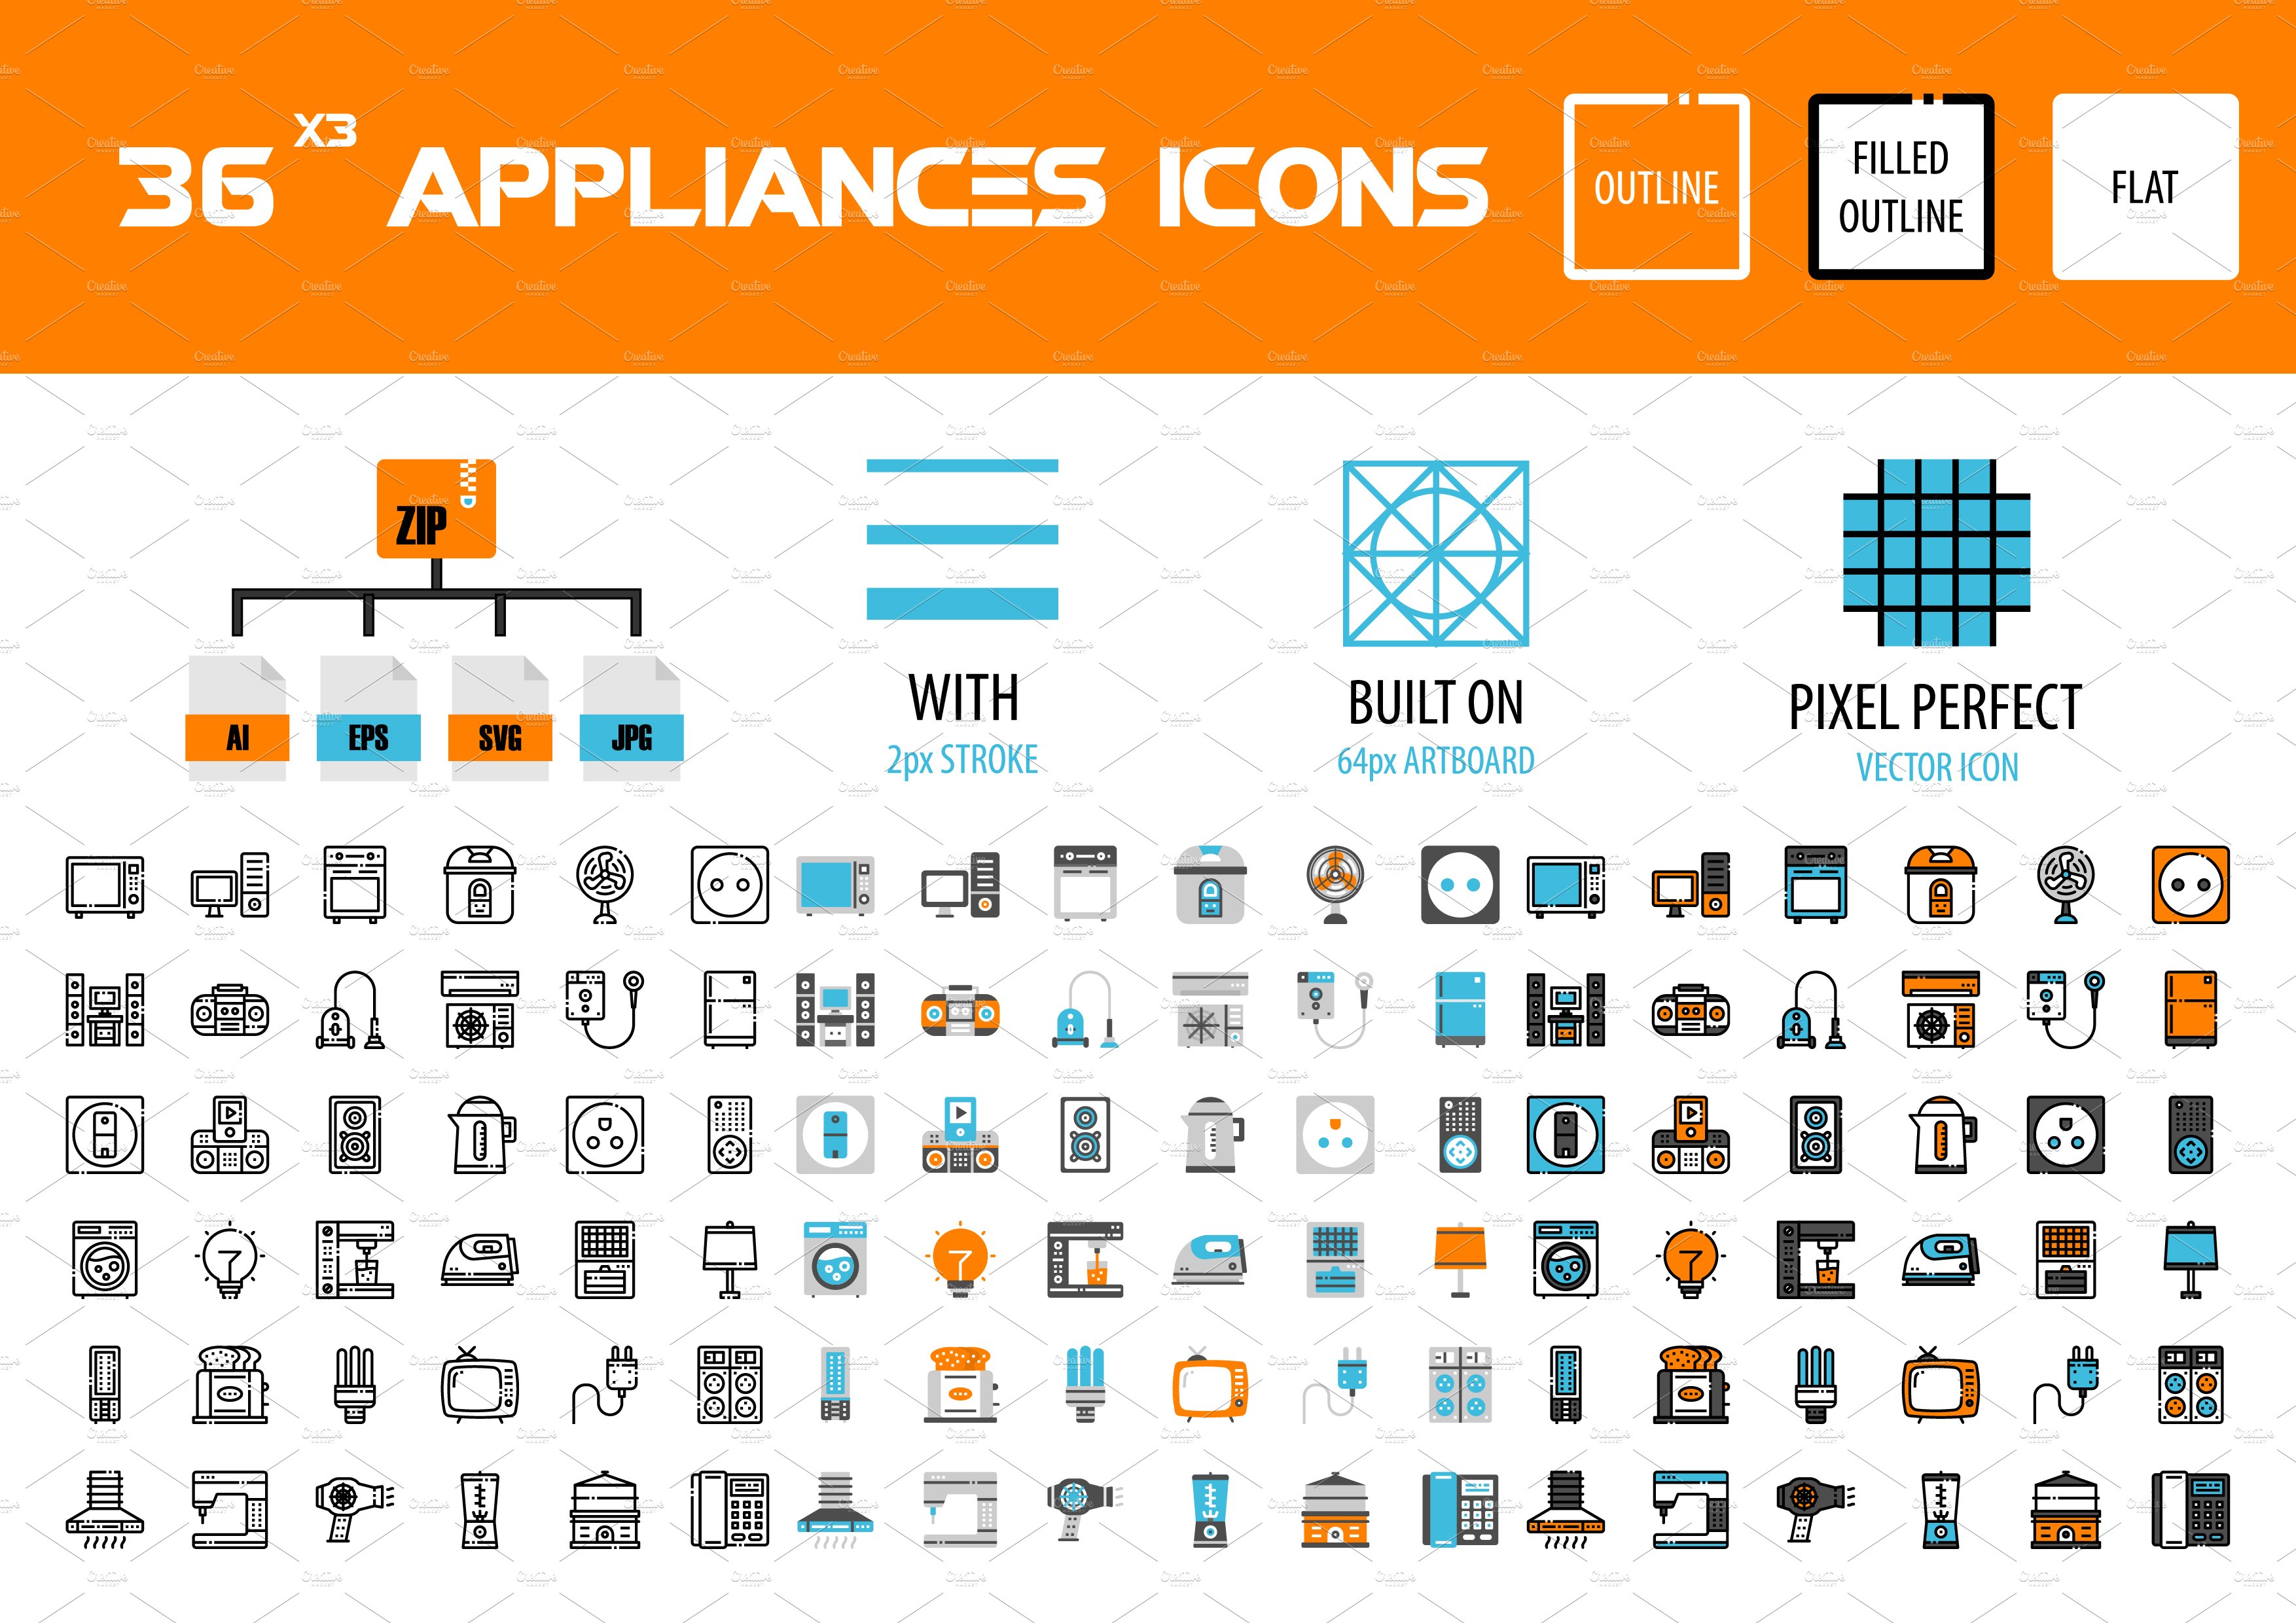 36x3 Home appliances icons preview image.